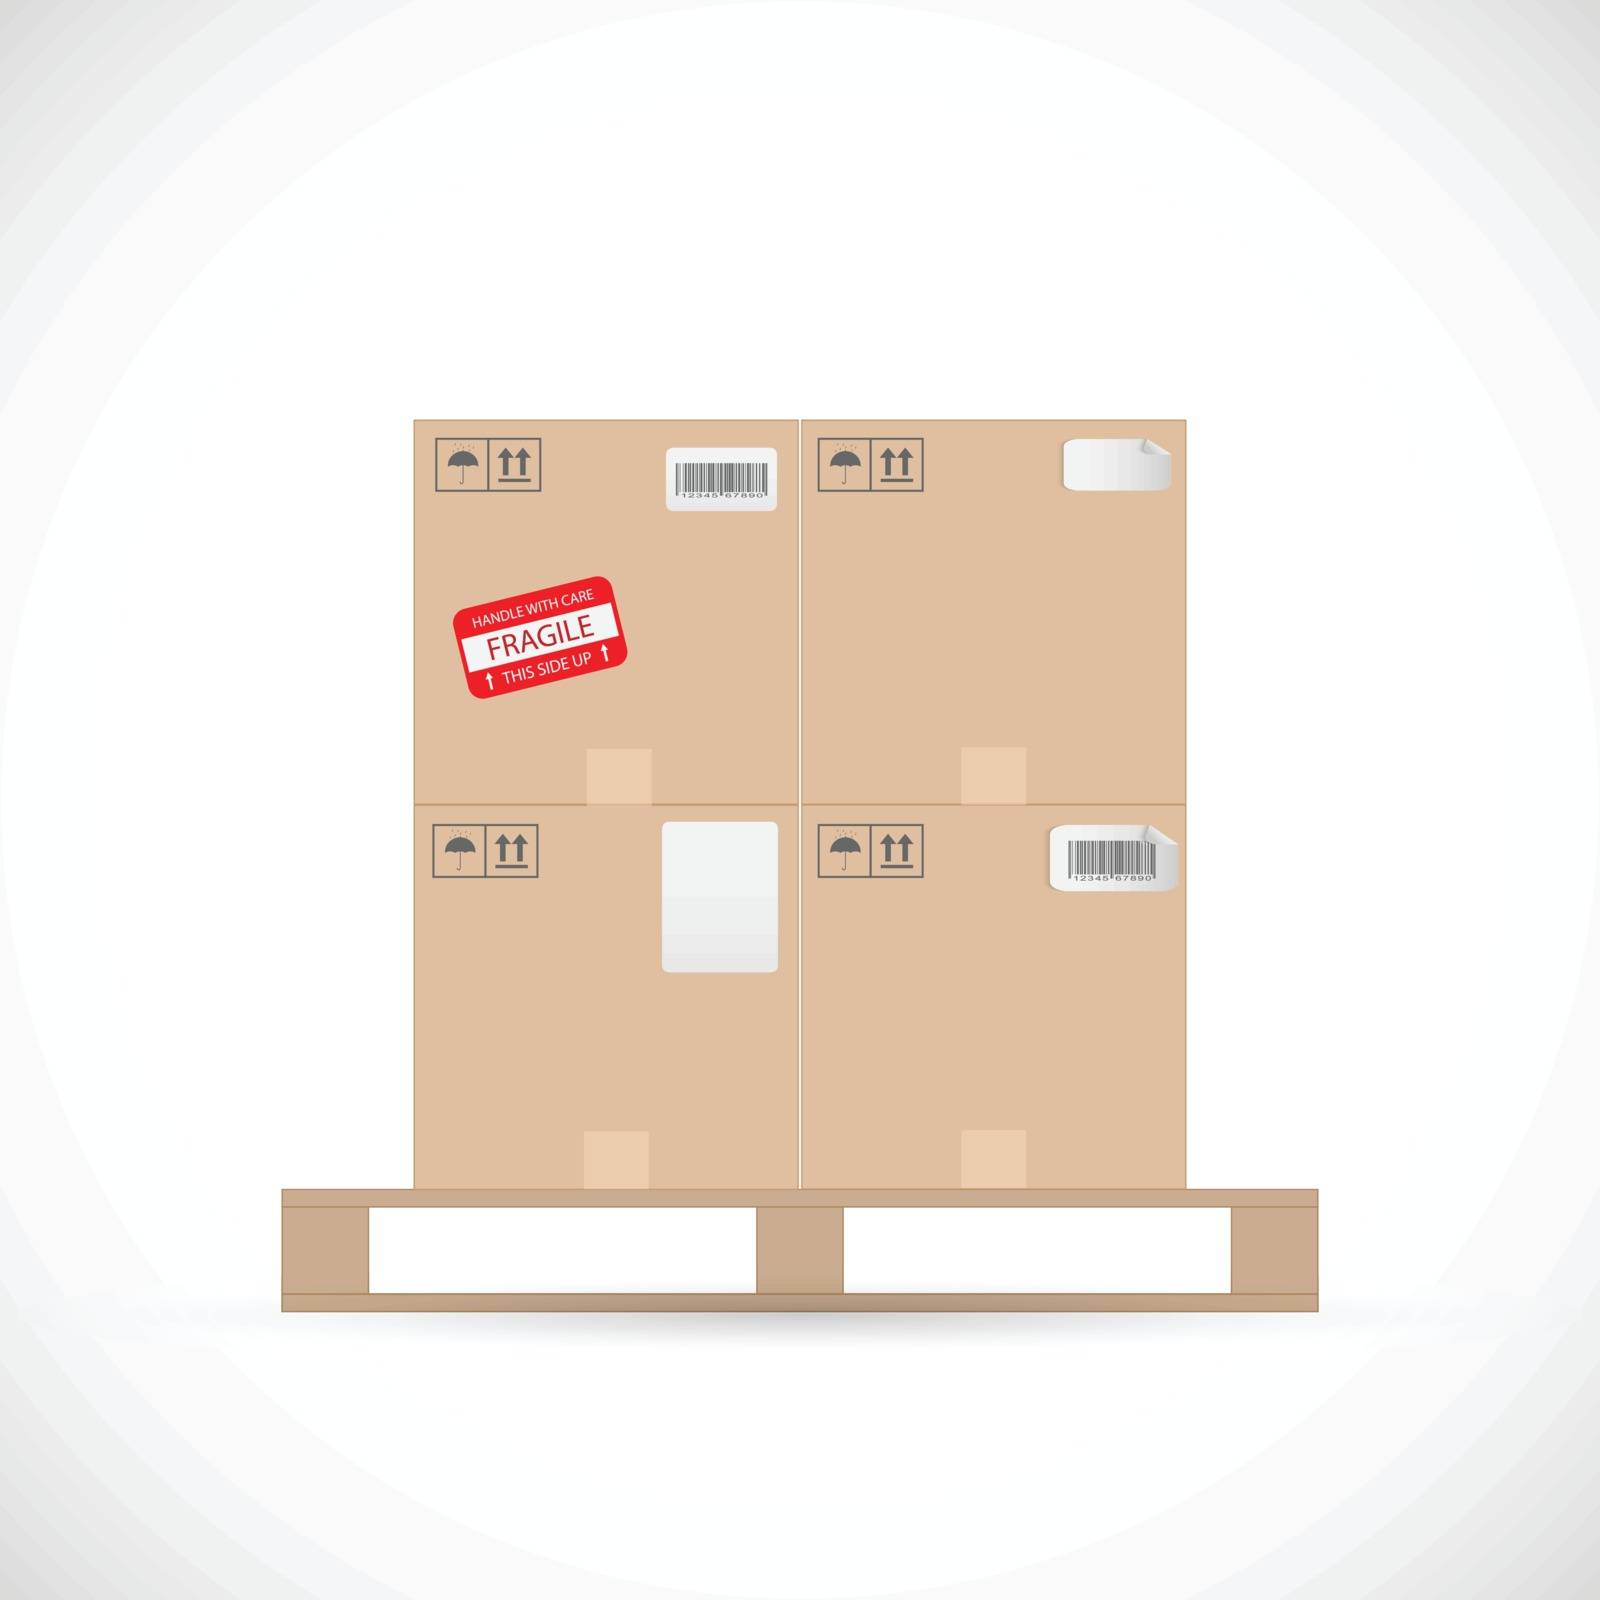 Illustration of a cardboard boxes on a pallet isolated on a white background.